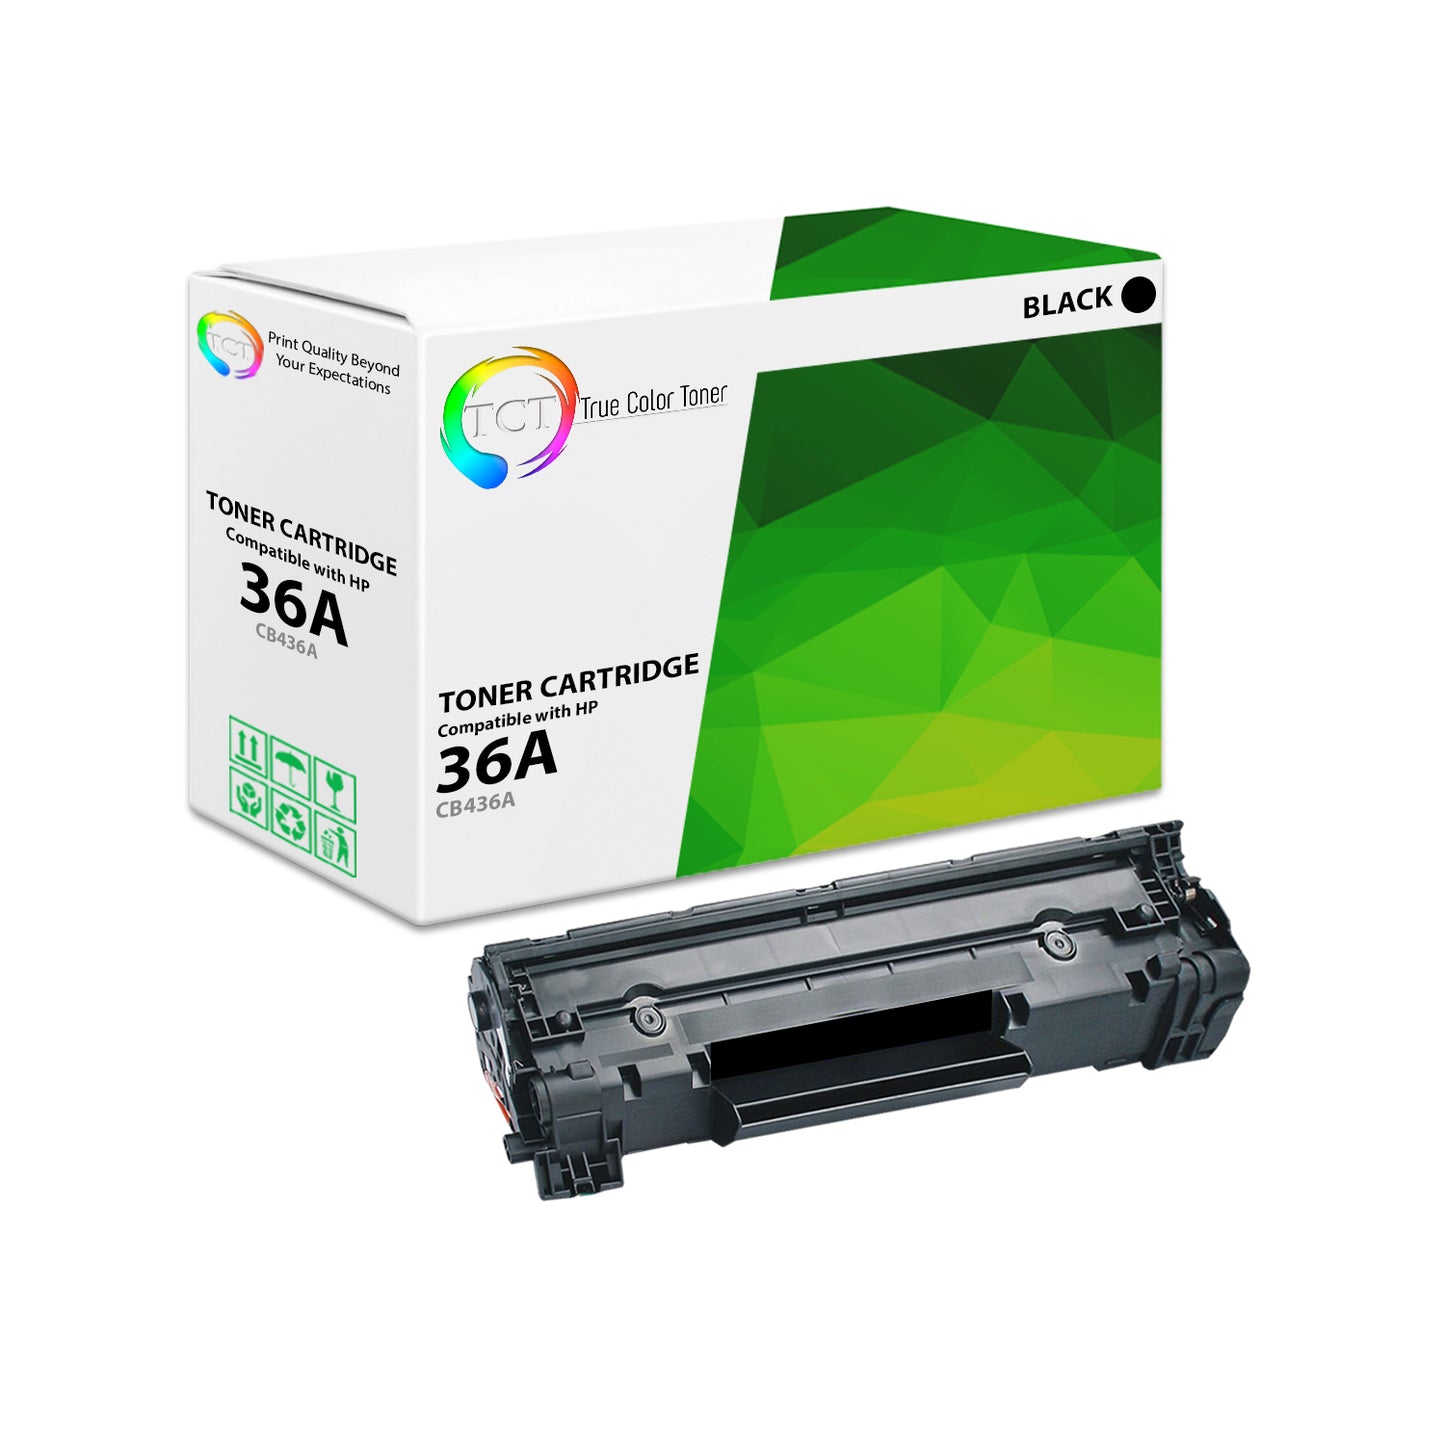 TCT Compatible Toner Cartridge Replacement for the HP 36A Series - 1 Pack Black